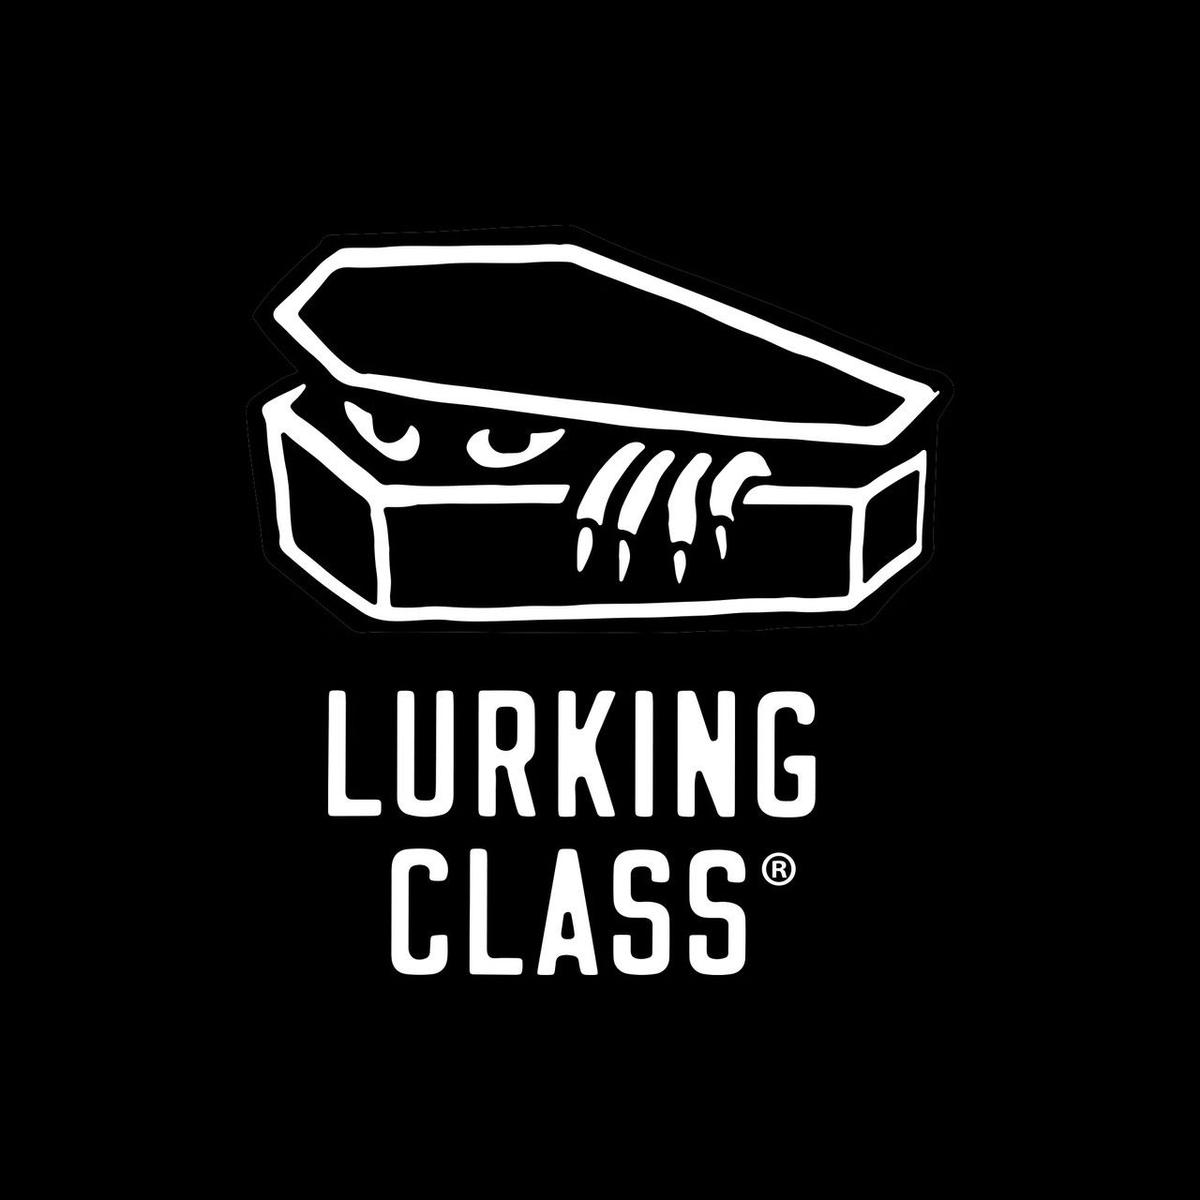 Lurking Class's images